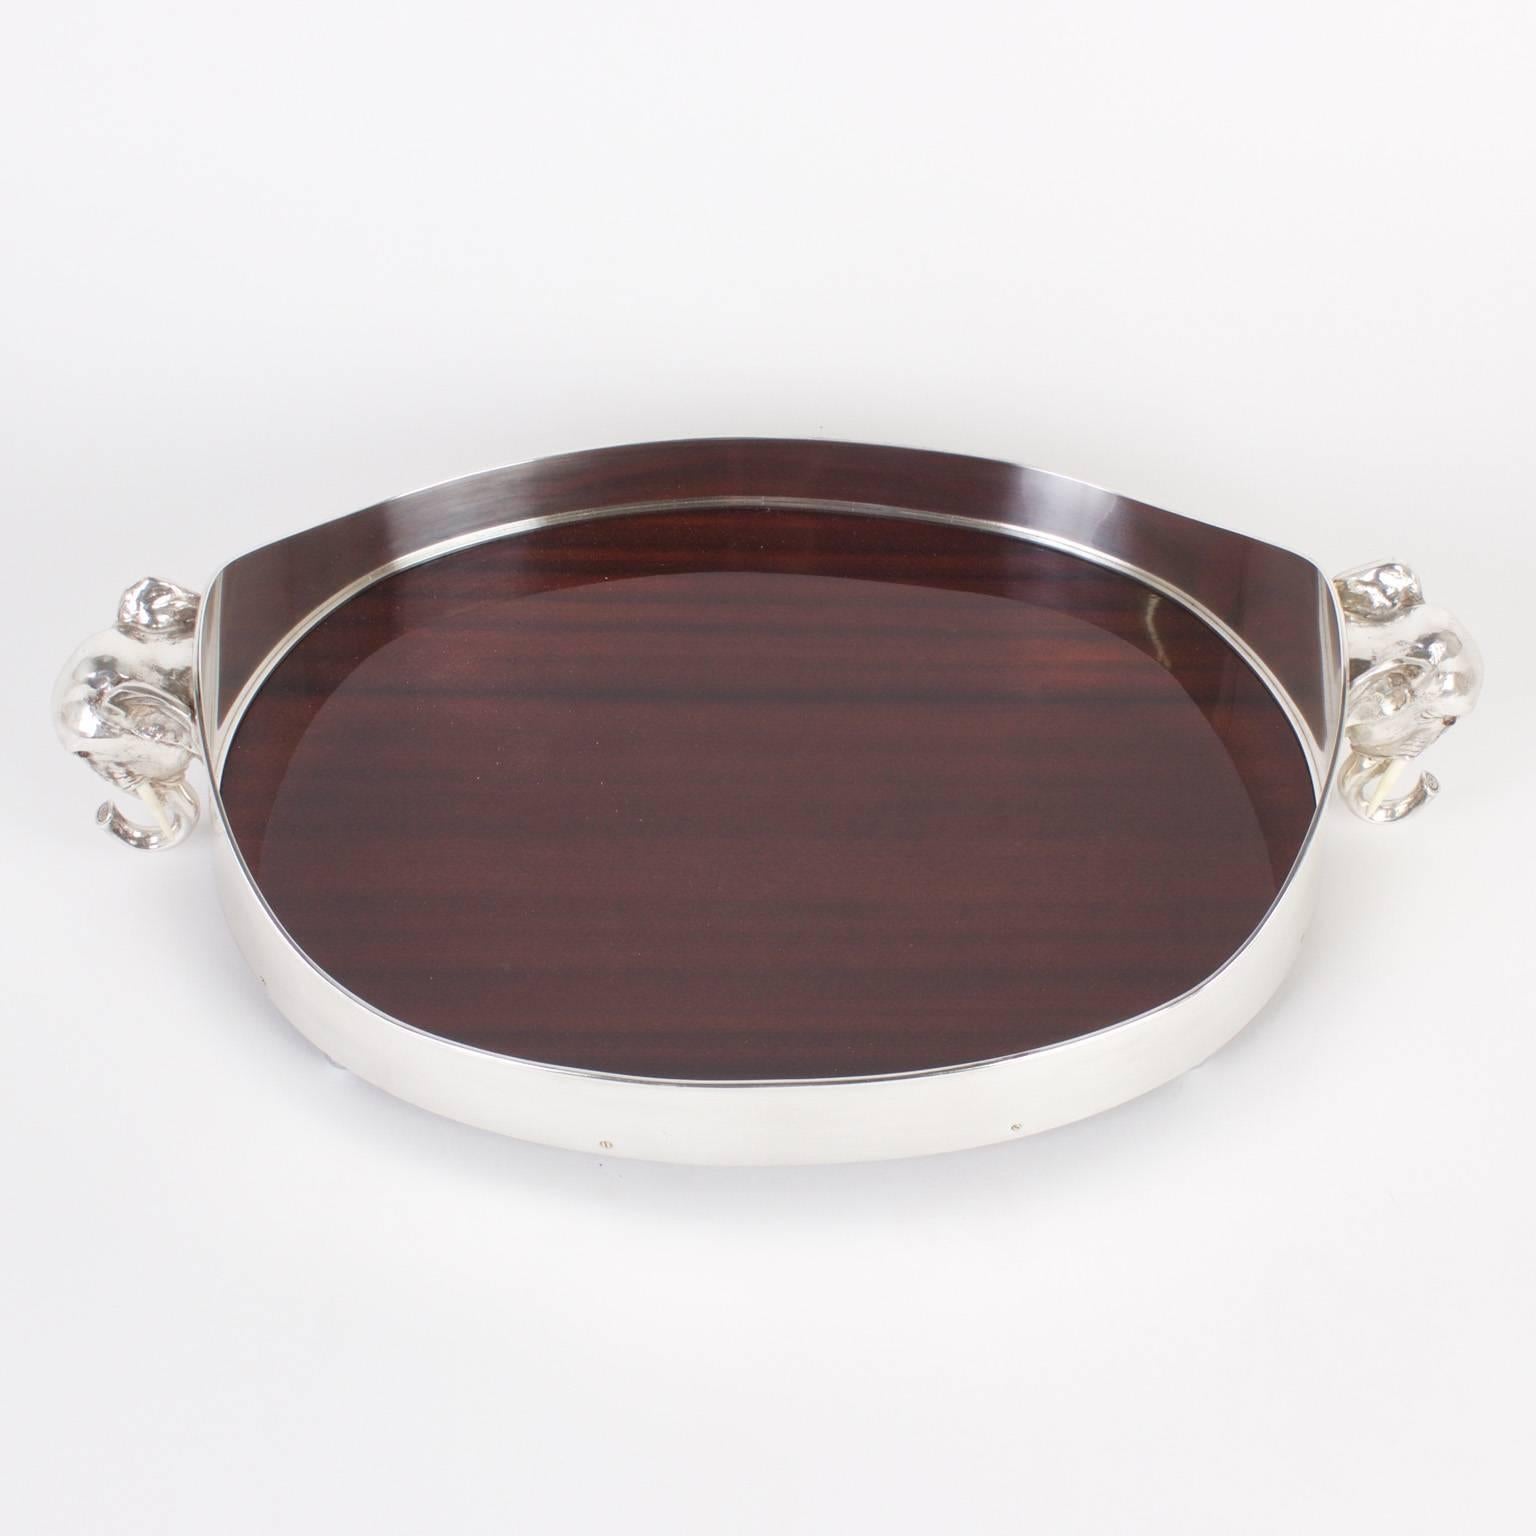 Elegant serving tray with a silvered metal frame and elephant head handles. The plateau is mahogany, making a sharpe statement against the silver frame. The whole tray sits on Classic ball feet. A pair is also available. Please inquire for more